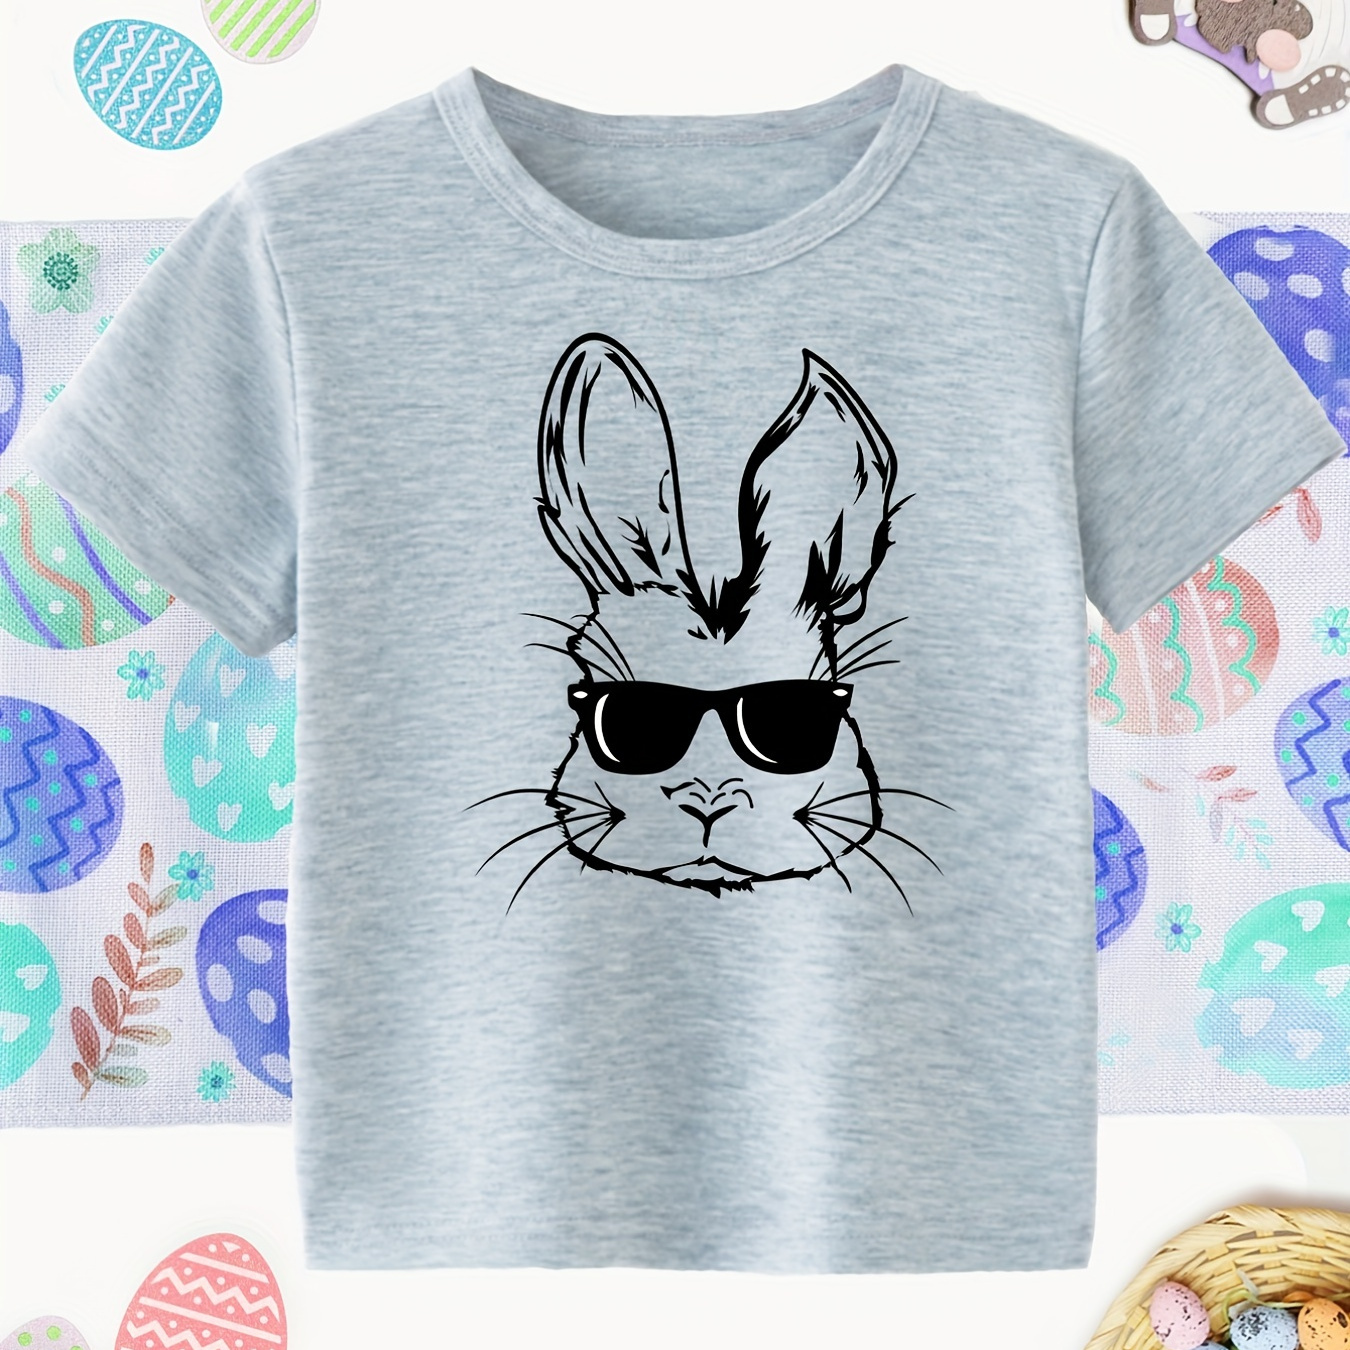 

Boys Easter Bunny Wearing A Pair Of Sunglasses T-shirt Tee Top Short Sleeves Crew Neck Summer Casual Kids Clothes